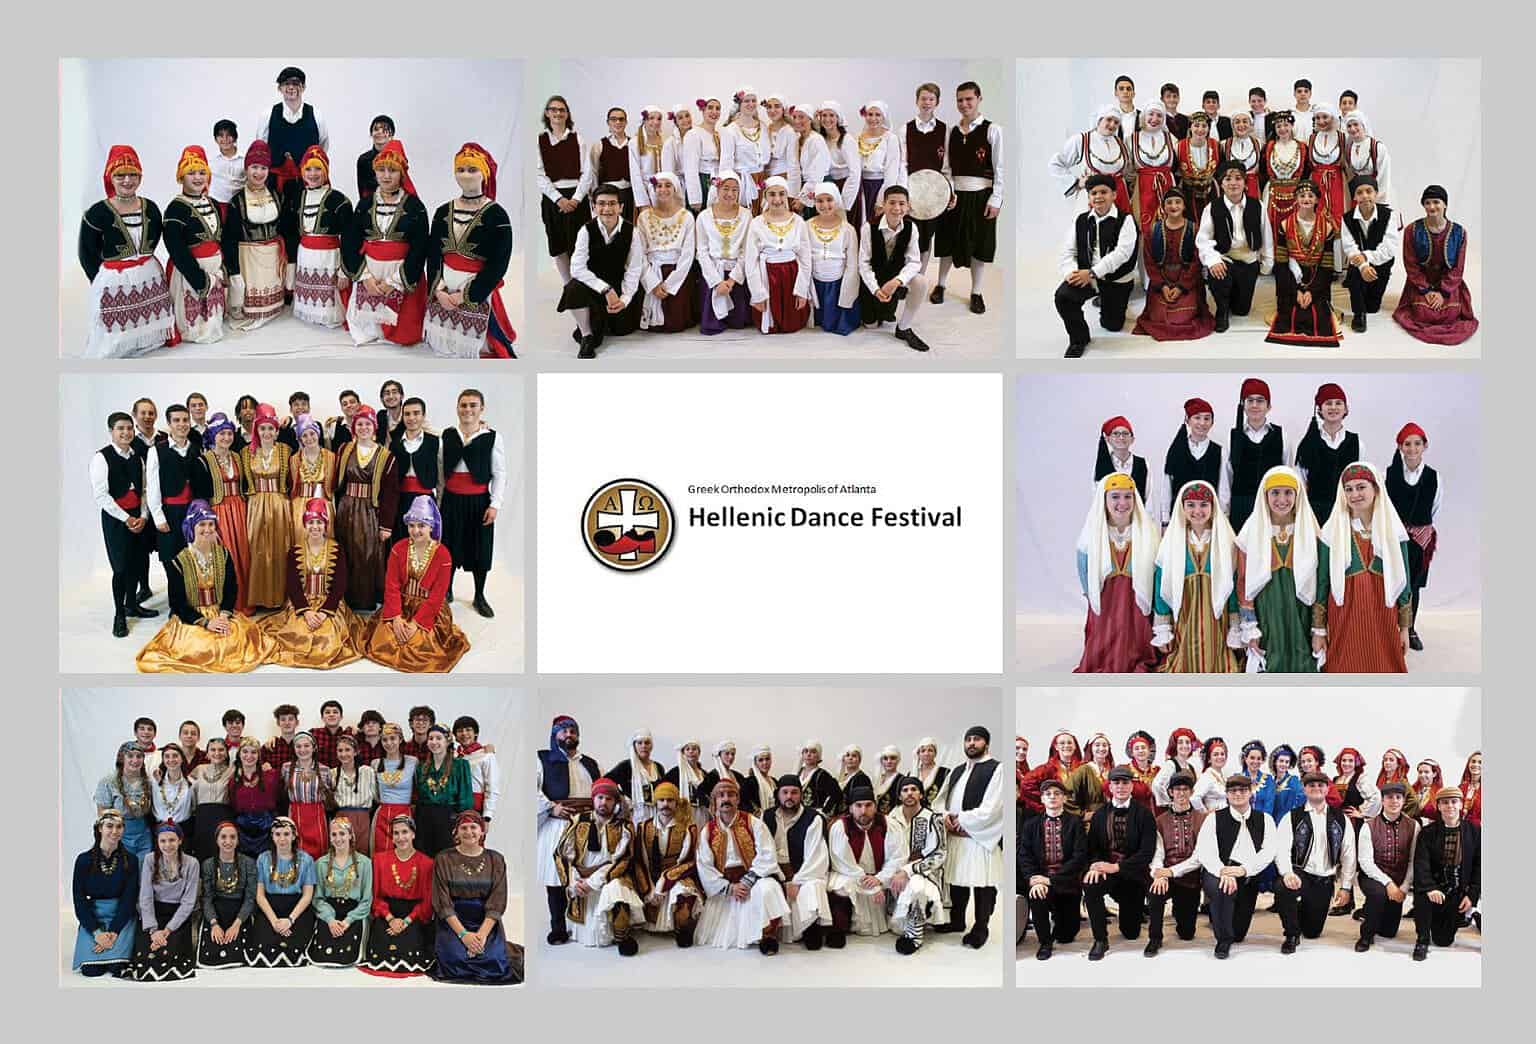 Hellenic Dance Festivals Reflections on a Long and Deep Cultural